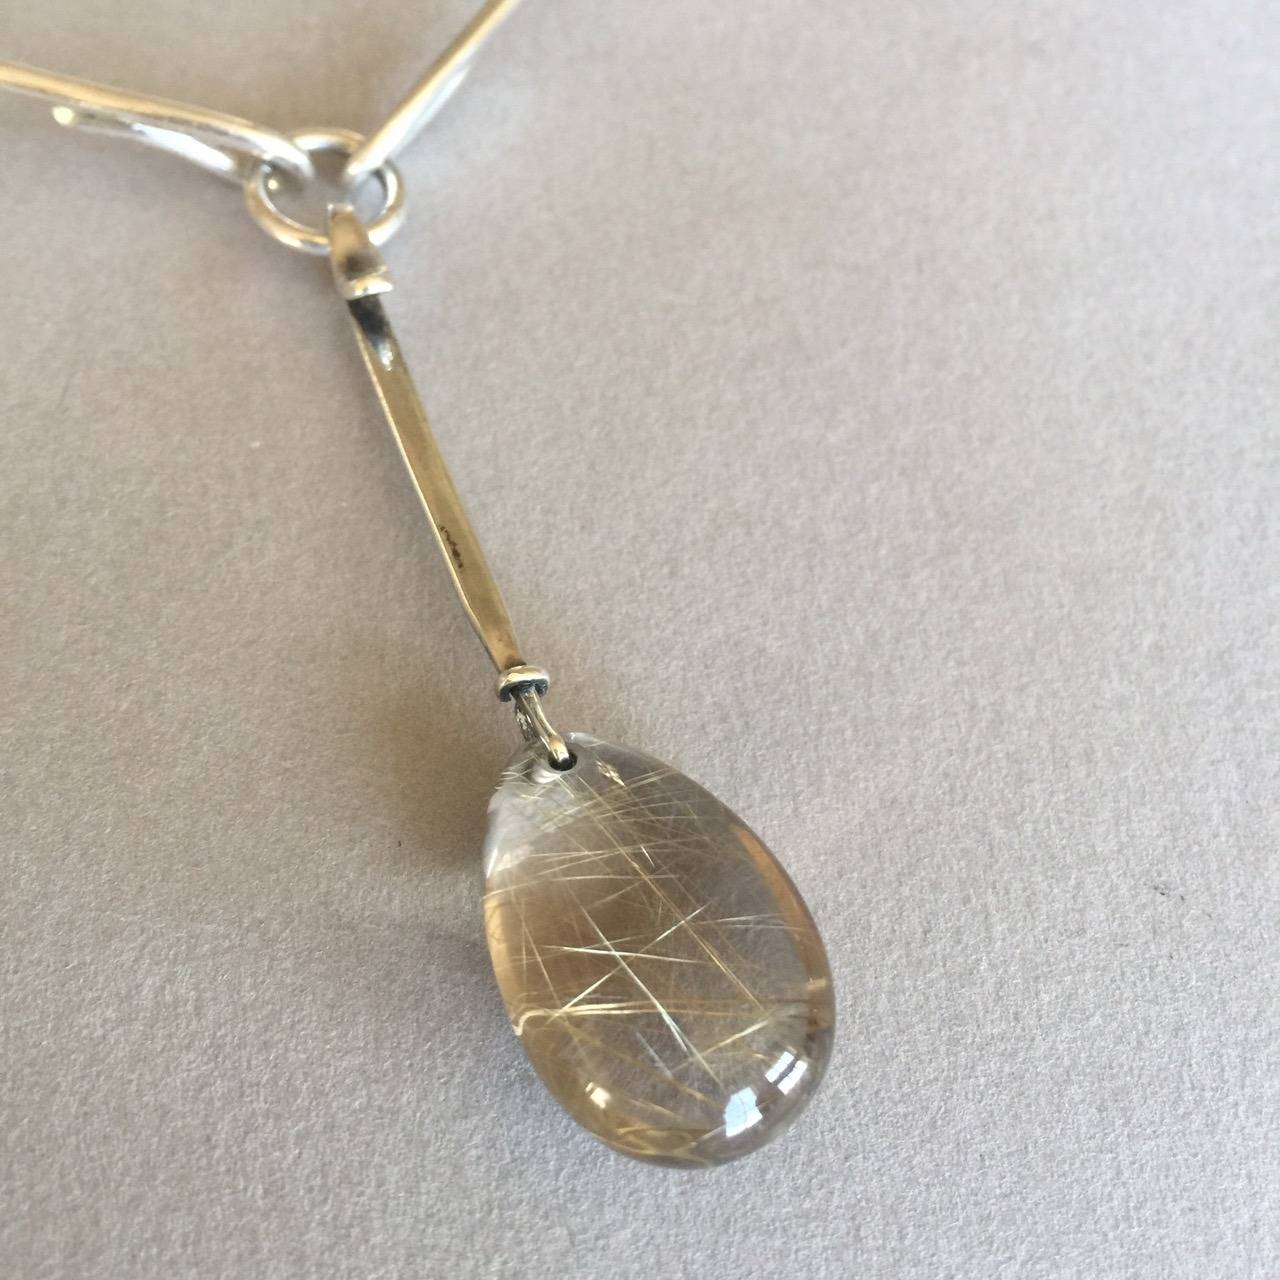 Georg Jensen sterling silver collar, no. 198 by Bent Gabrielsen with rutilated Quartz drop, no. 128 by Vivianna Torun. Denmark. 

This collar allows the wearer more flexibility as it is hinged.

Measures 6